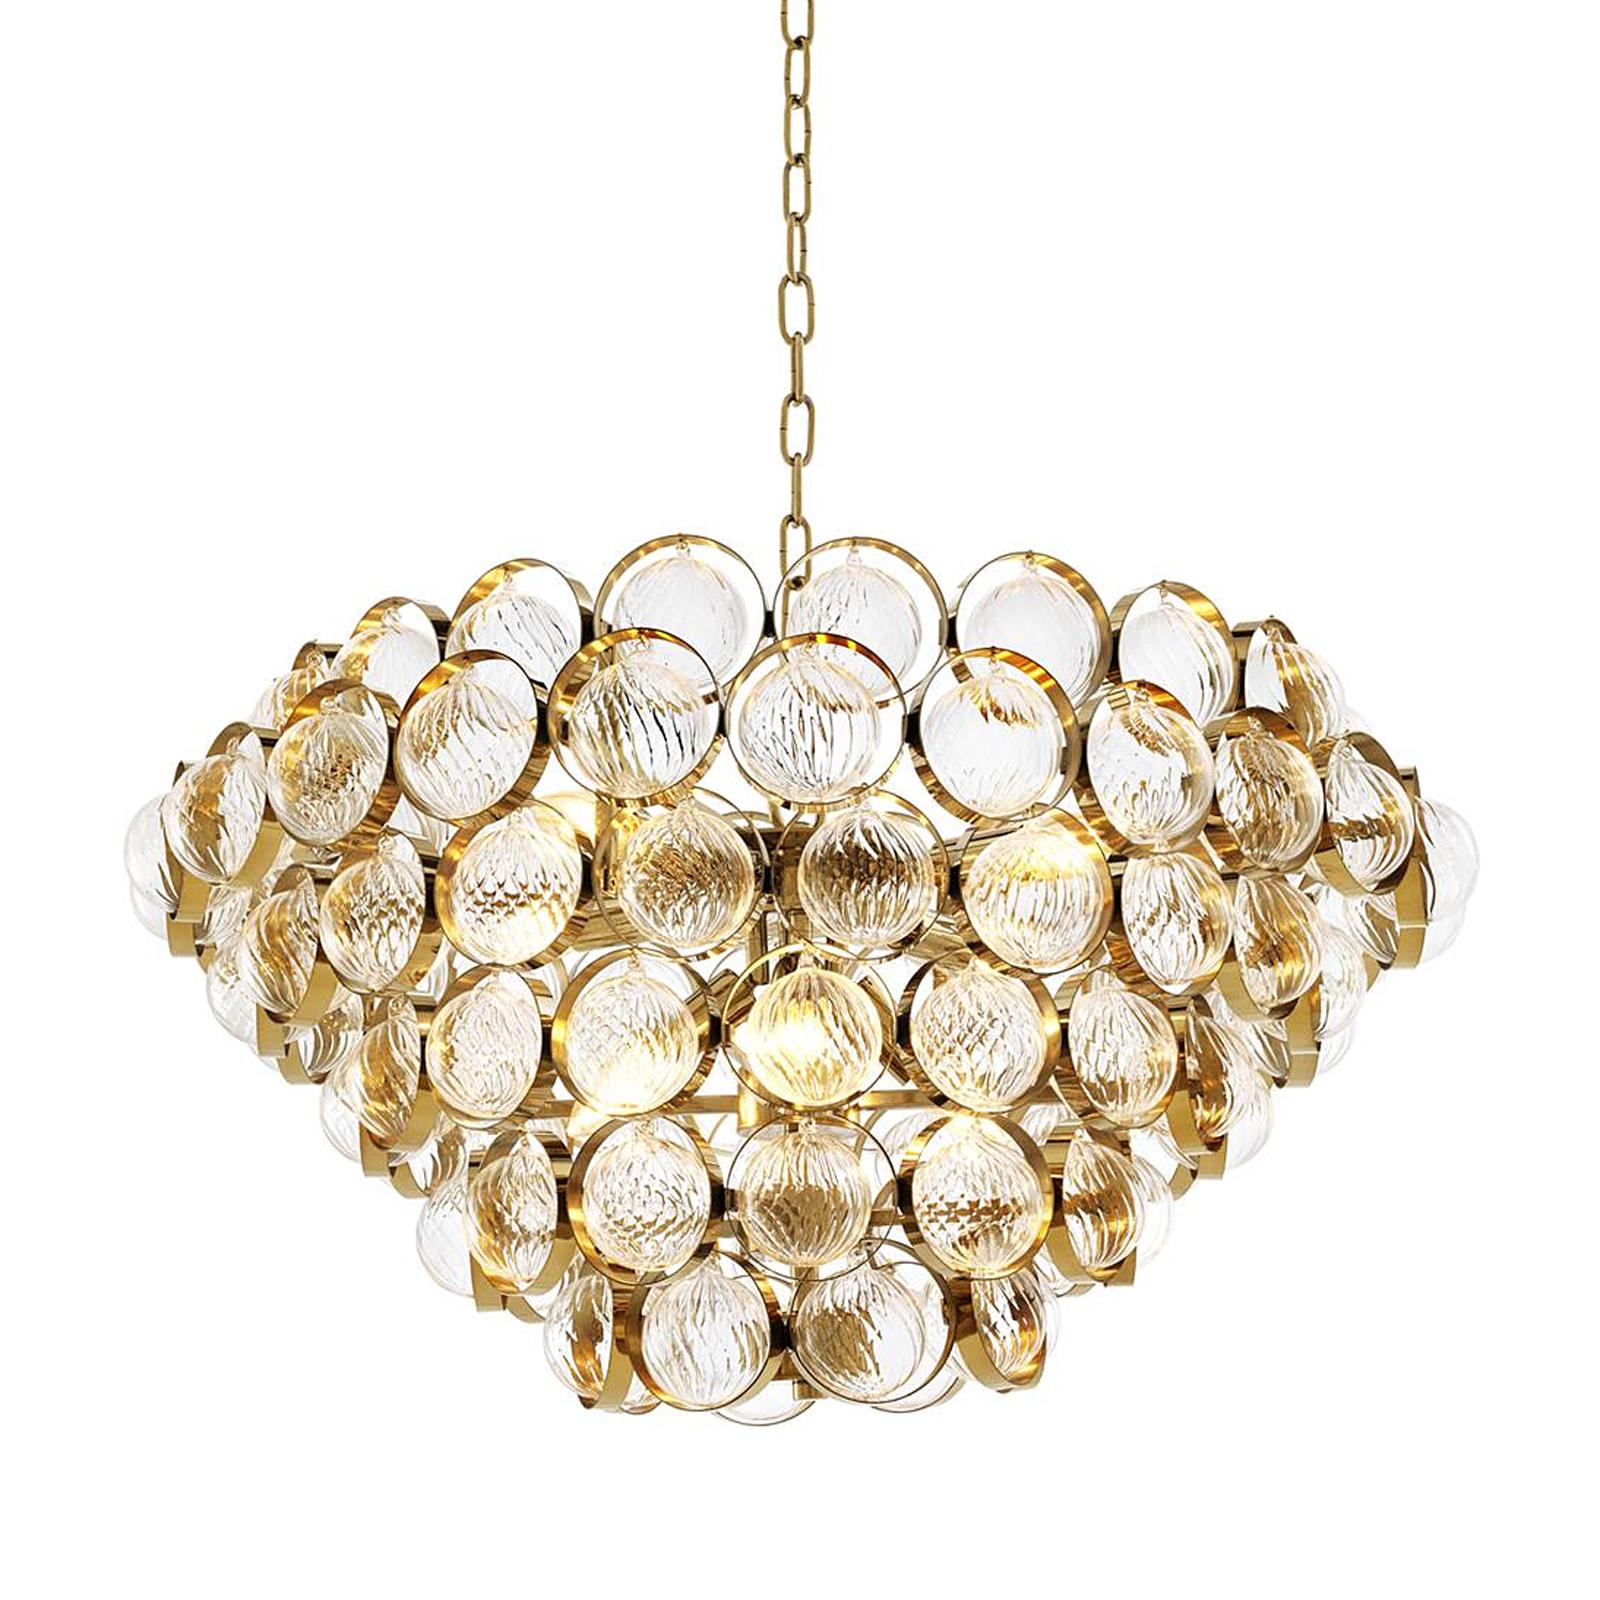 Chandelier Pleyel with all structure in solid brass
in polished finish, with clear glass. 8 bulbs, lamp
holder type E14, bulbs not included, max 40 watts.
Dimmable, dimmer not included. Including 150cm
hanging chain and 176cm wire cord.